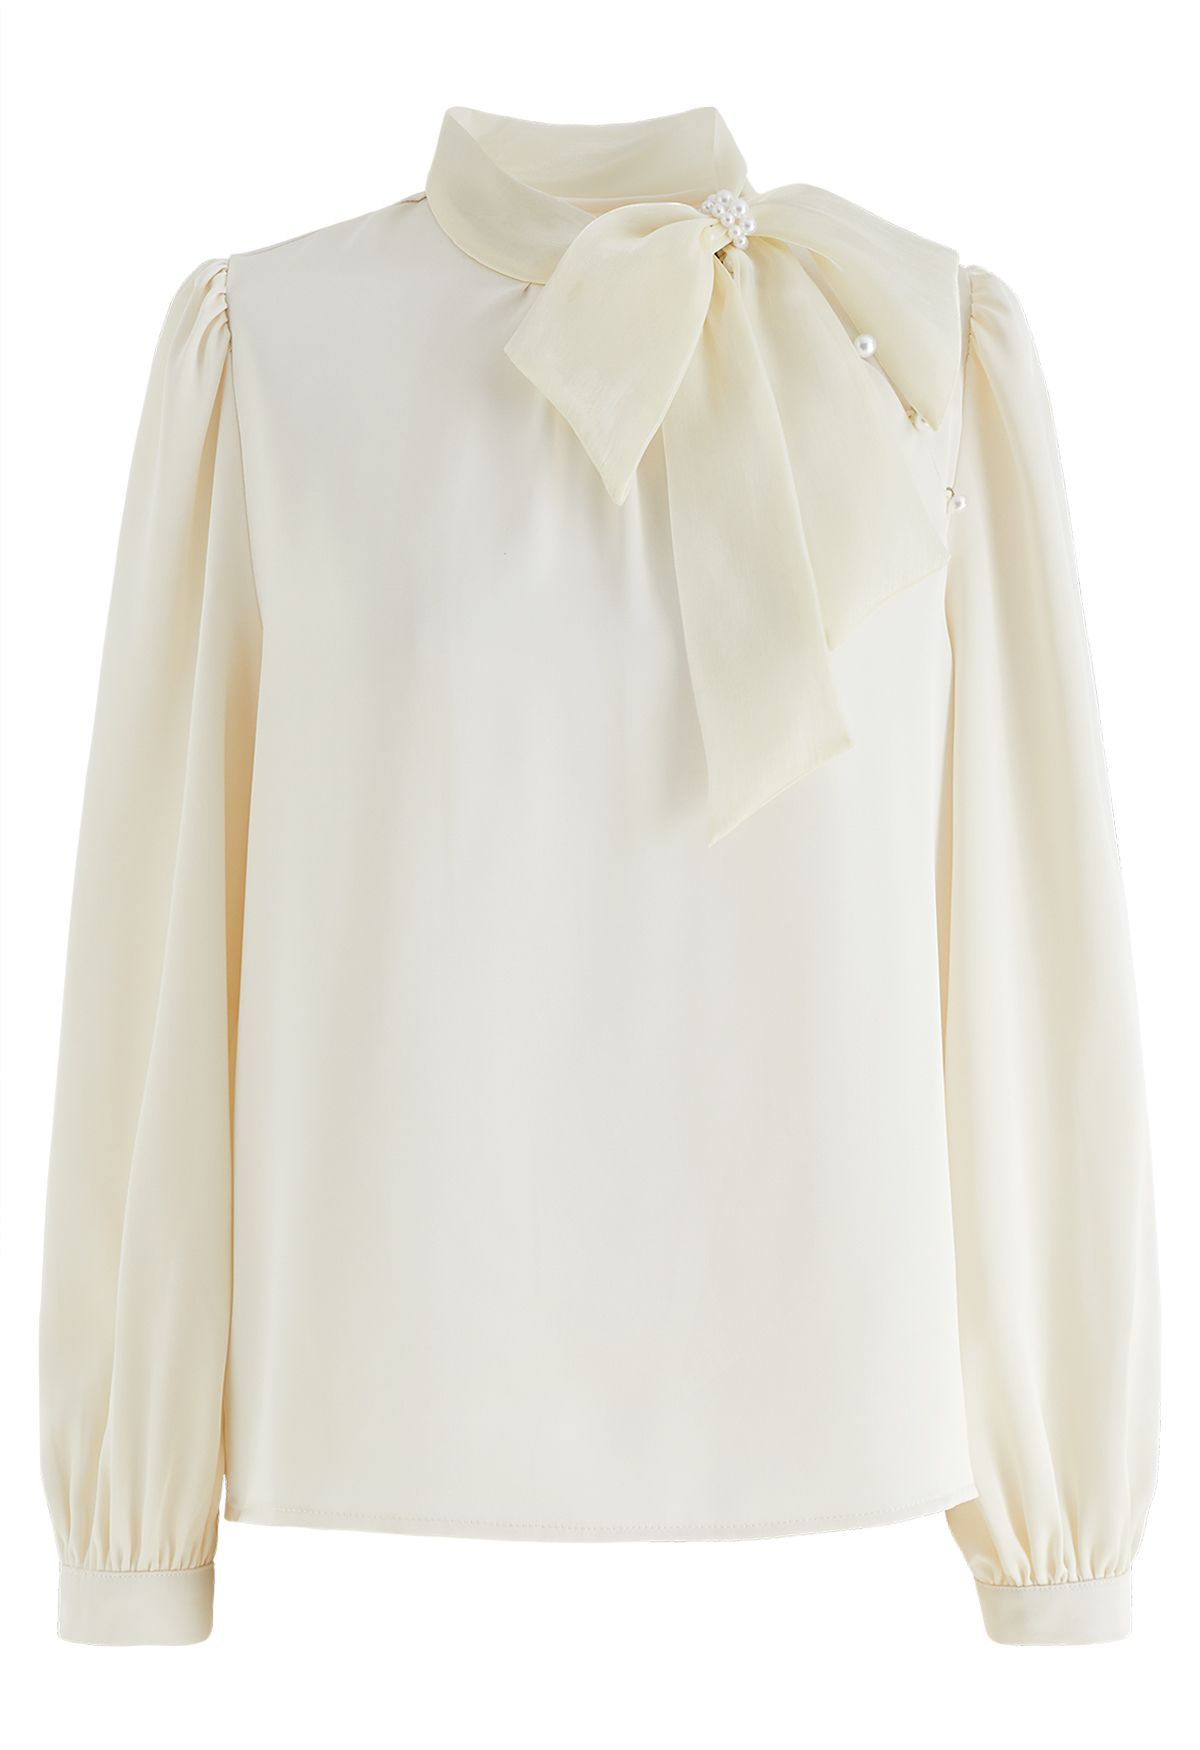 Organza Bowknot Pearl Satin Shirt in Light Yellow - Retro, Indie and ...